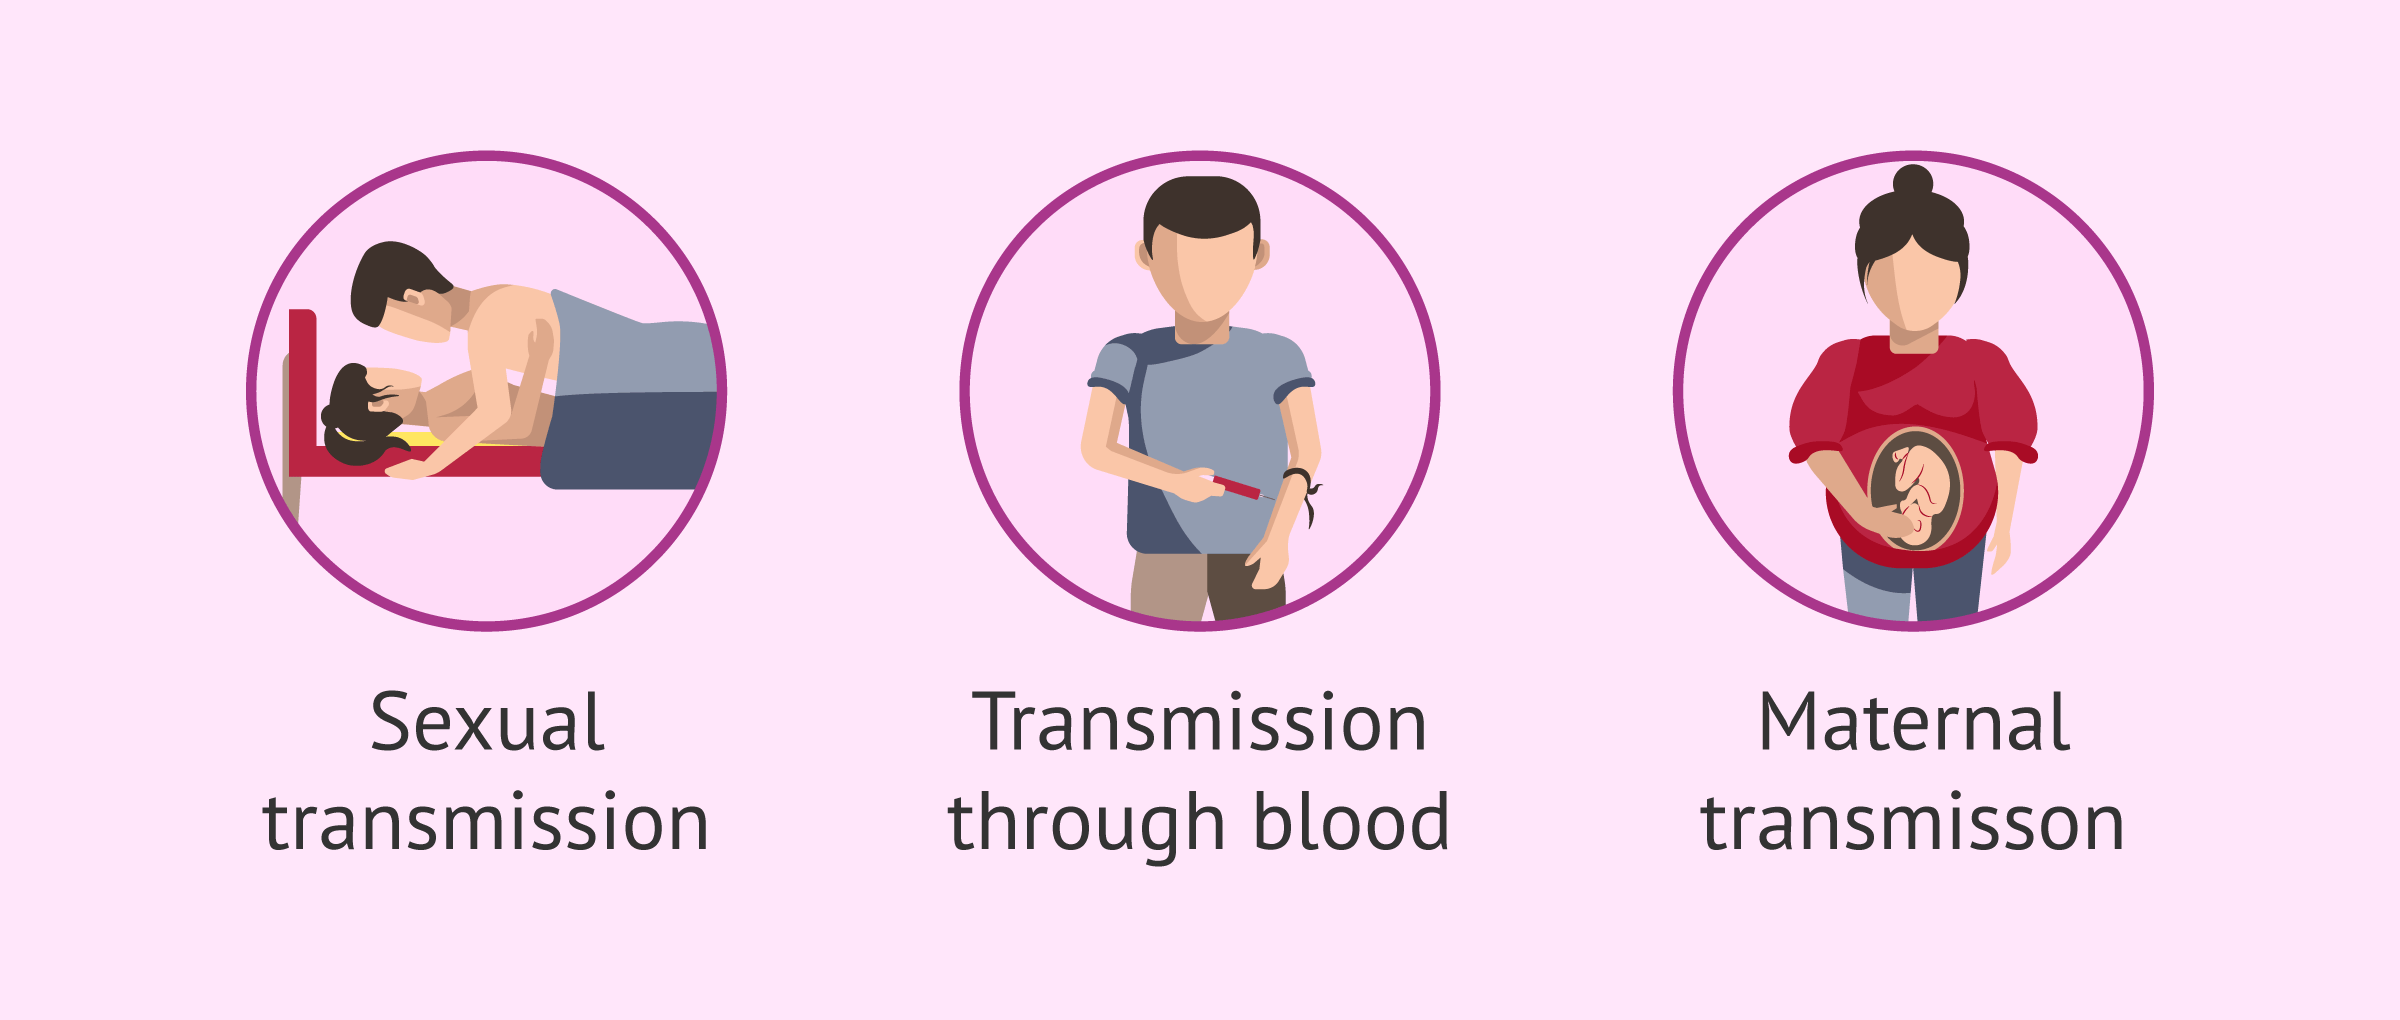 Routes of HIV transmission